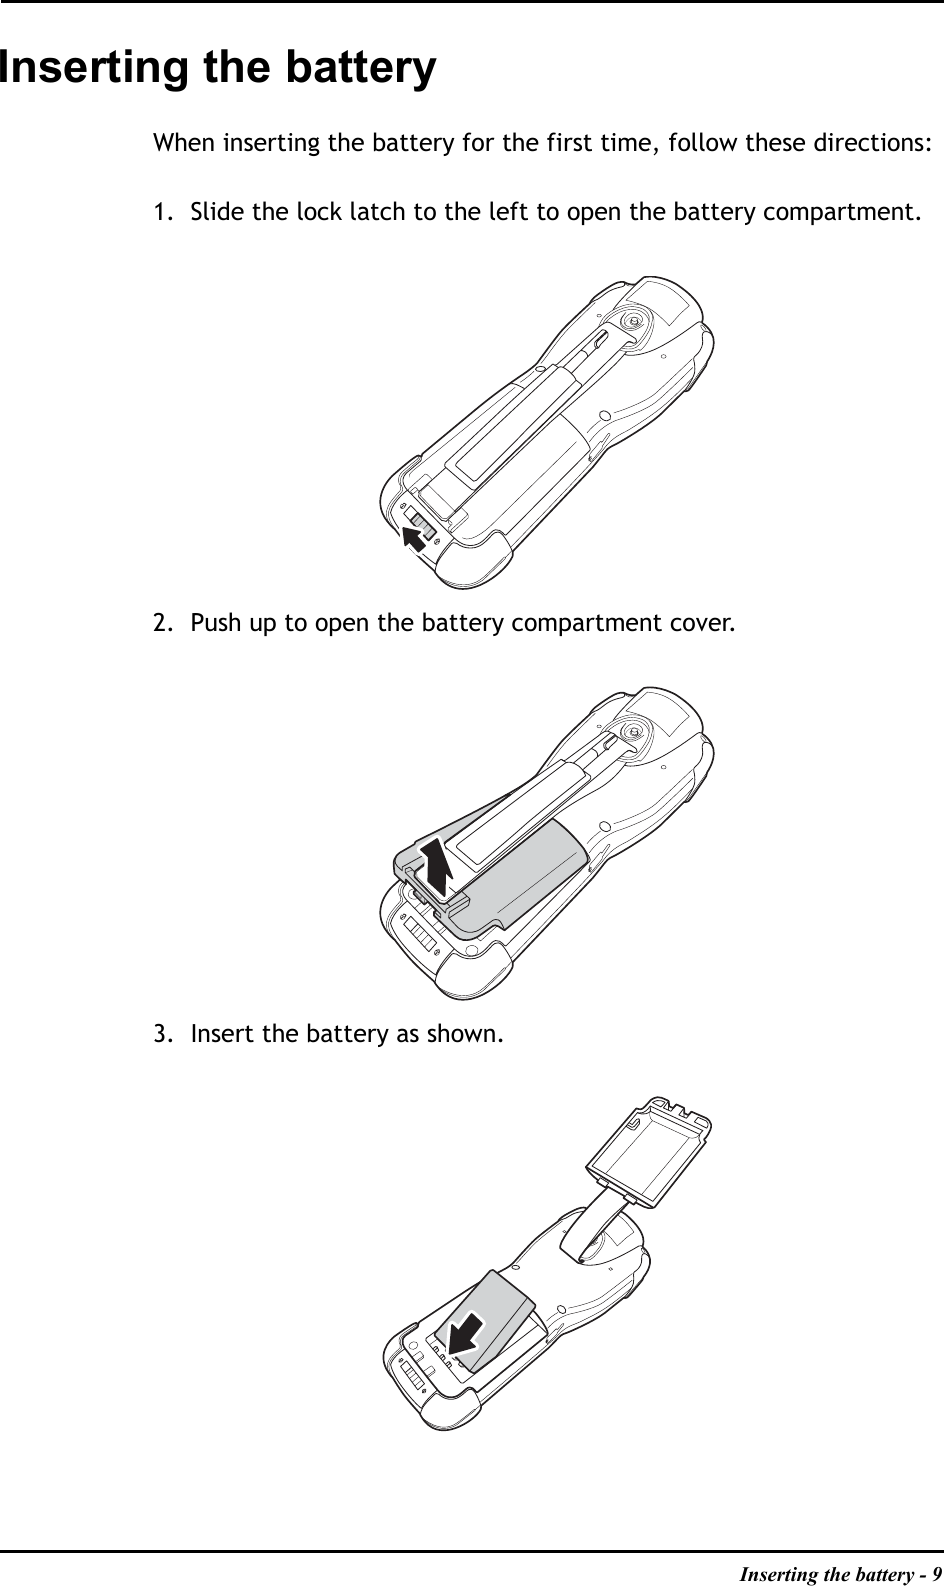 Inserting the battery - 9Inserting the batteryWhen inserting the battery for the first time, follow these directions:1. Slide the lock latch to the left to open the battery compartment.2. Push up to open the battery compartment cover.3. Insert the battery as shown.